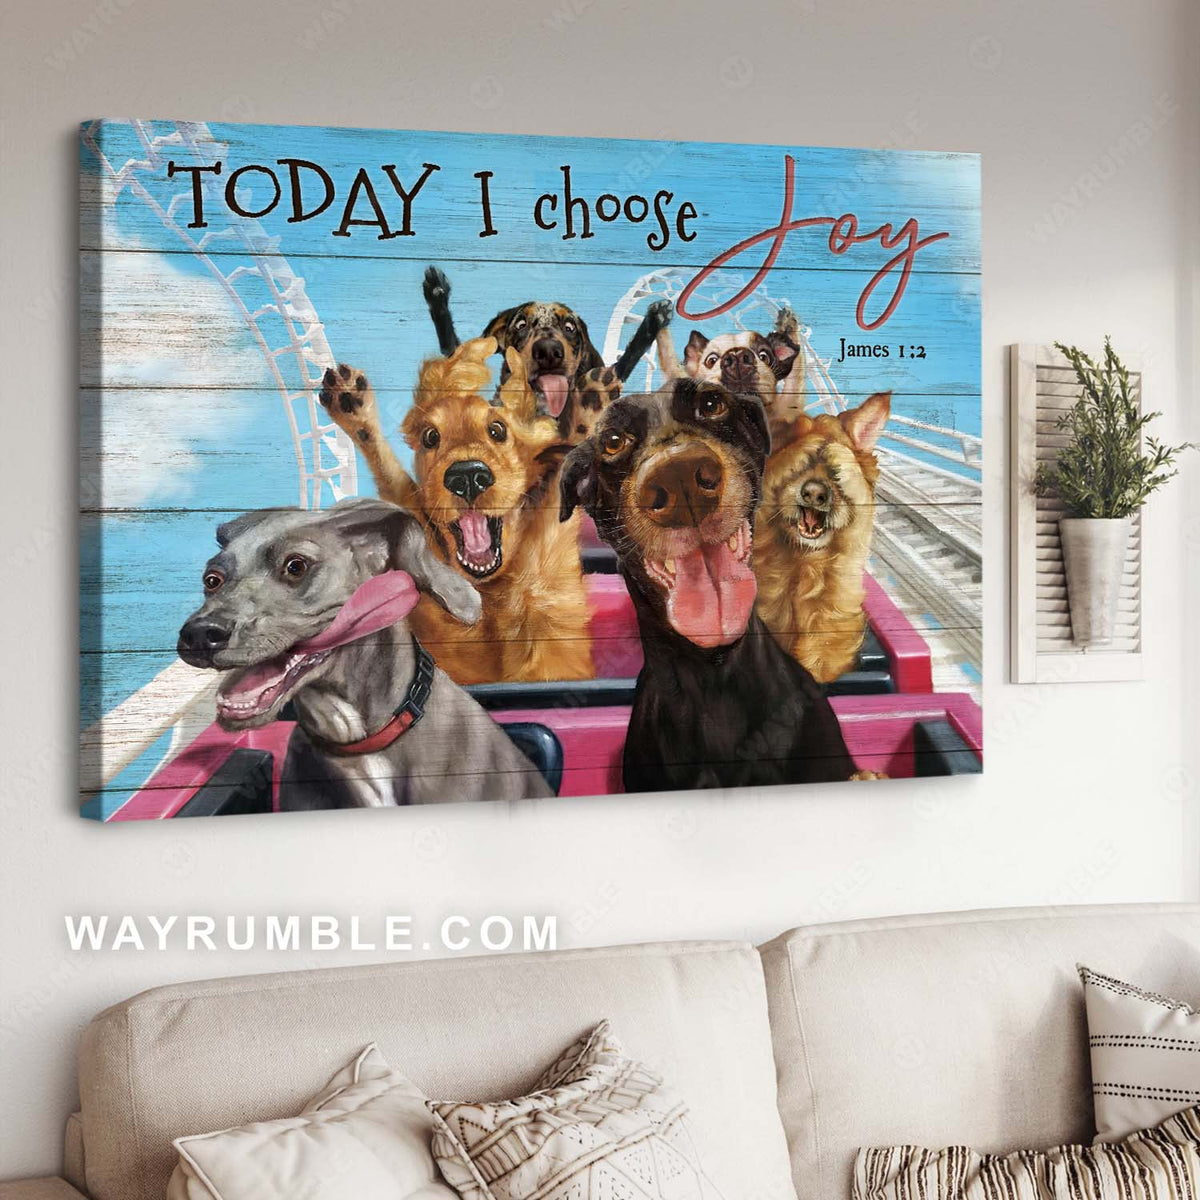 Joyriza All You Need is Love and A Dog – Funny Gifts for Dog